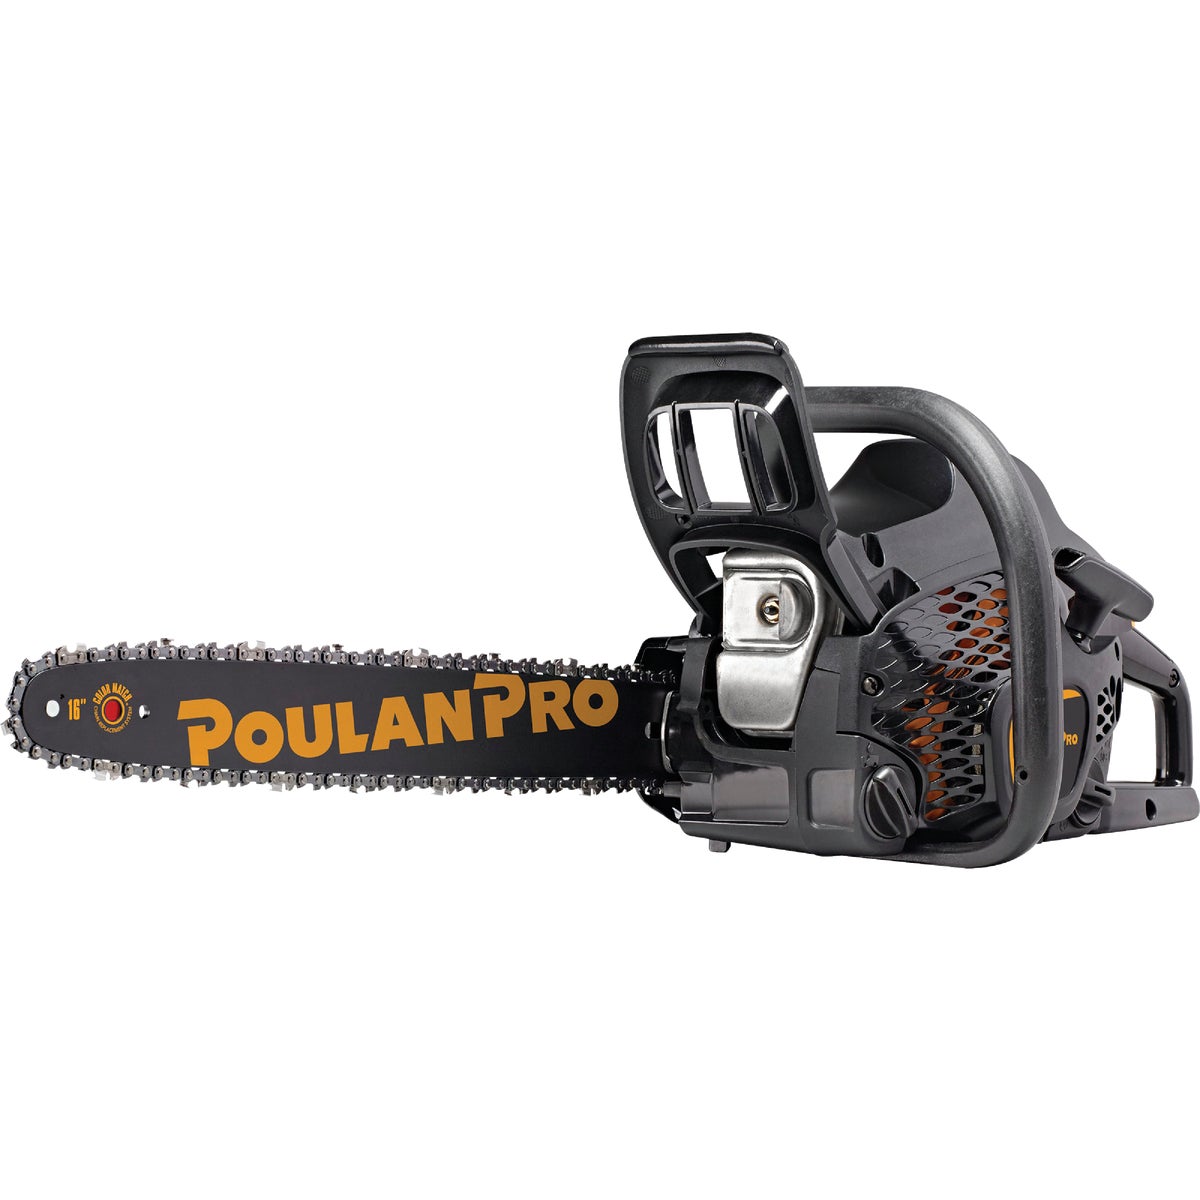 Item 736343, Poulan Pro PR4016 has a 2-cycle engine with 16 In.